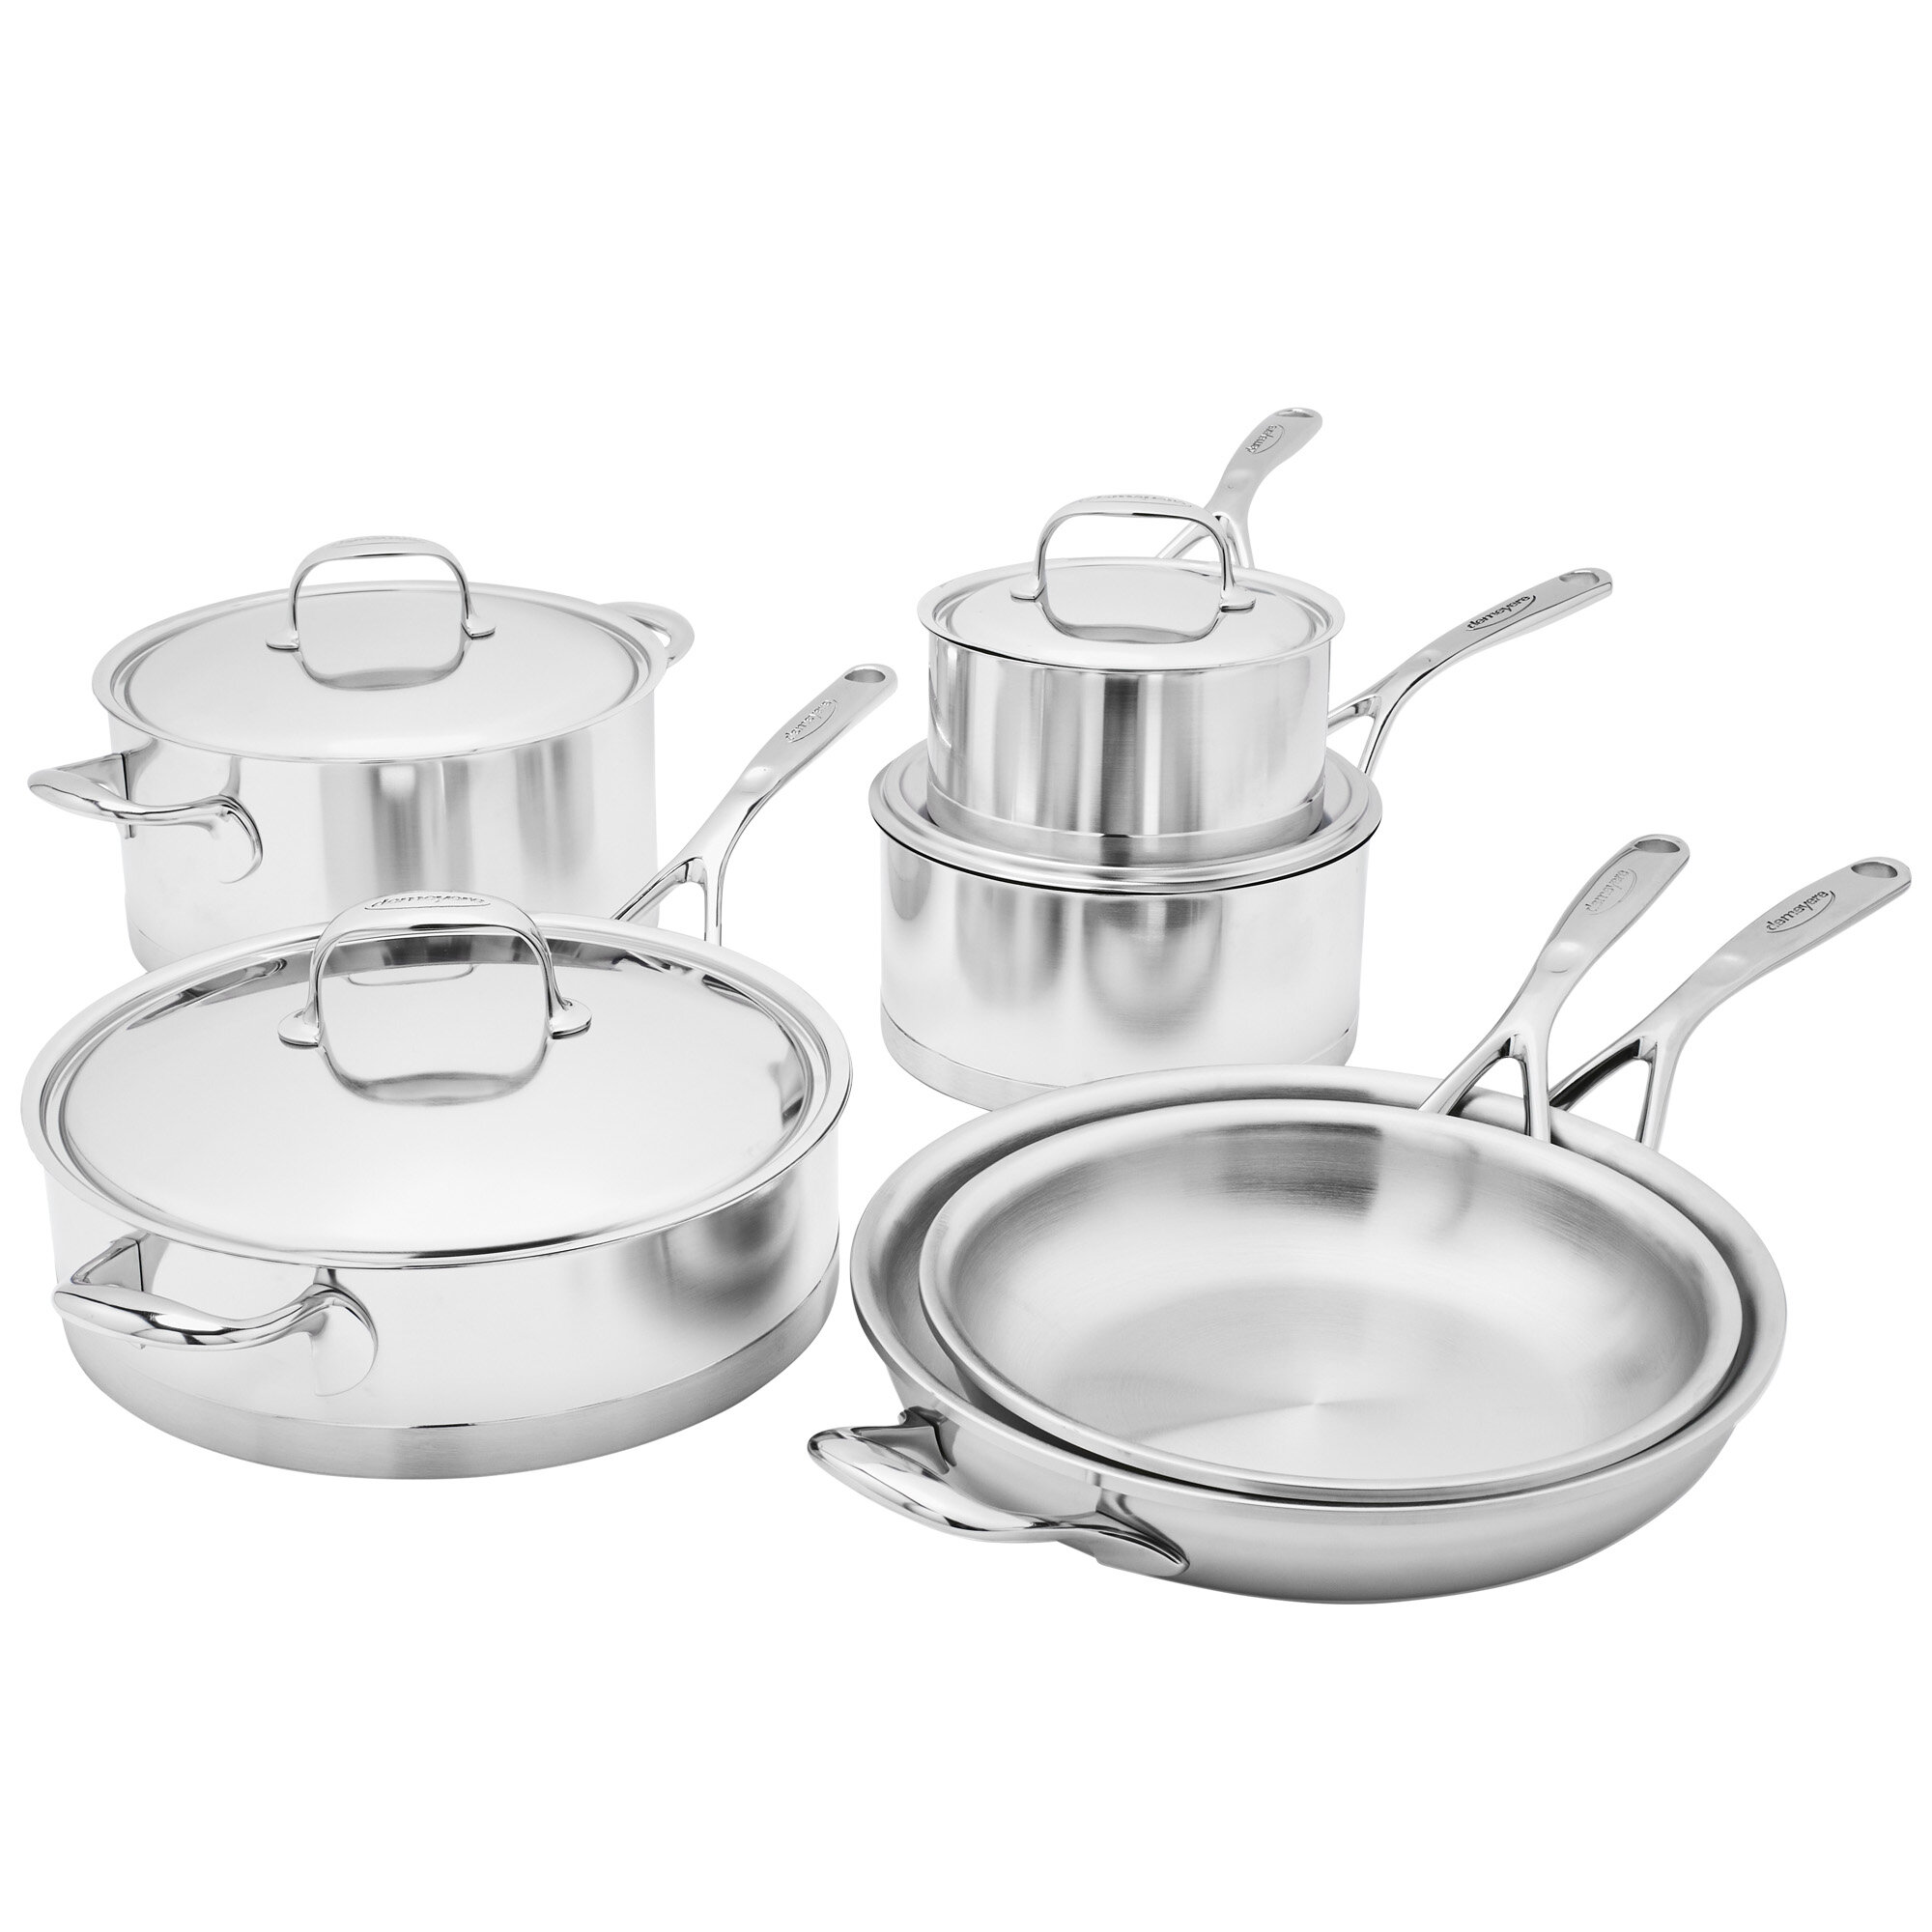 Demeyere Essential 5-Ply 10-pc Stainless Steel Cookware Set